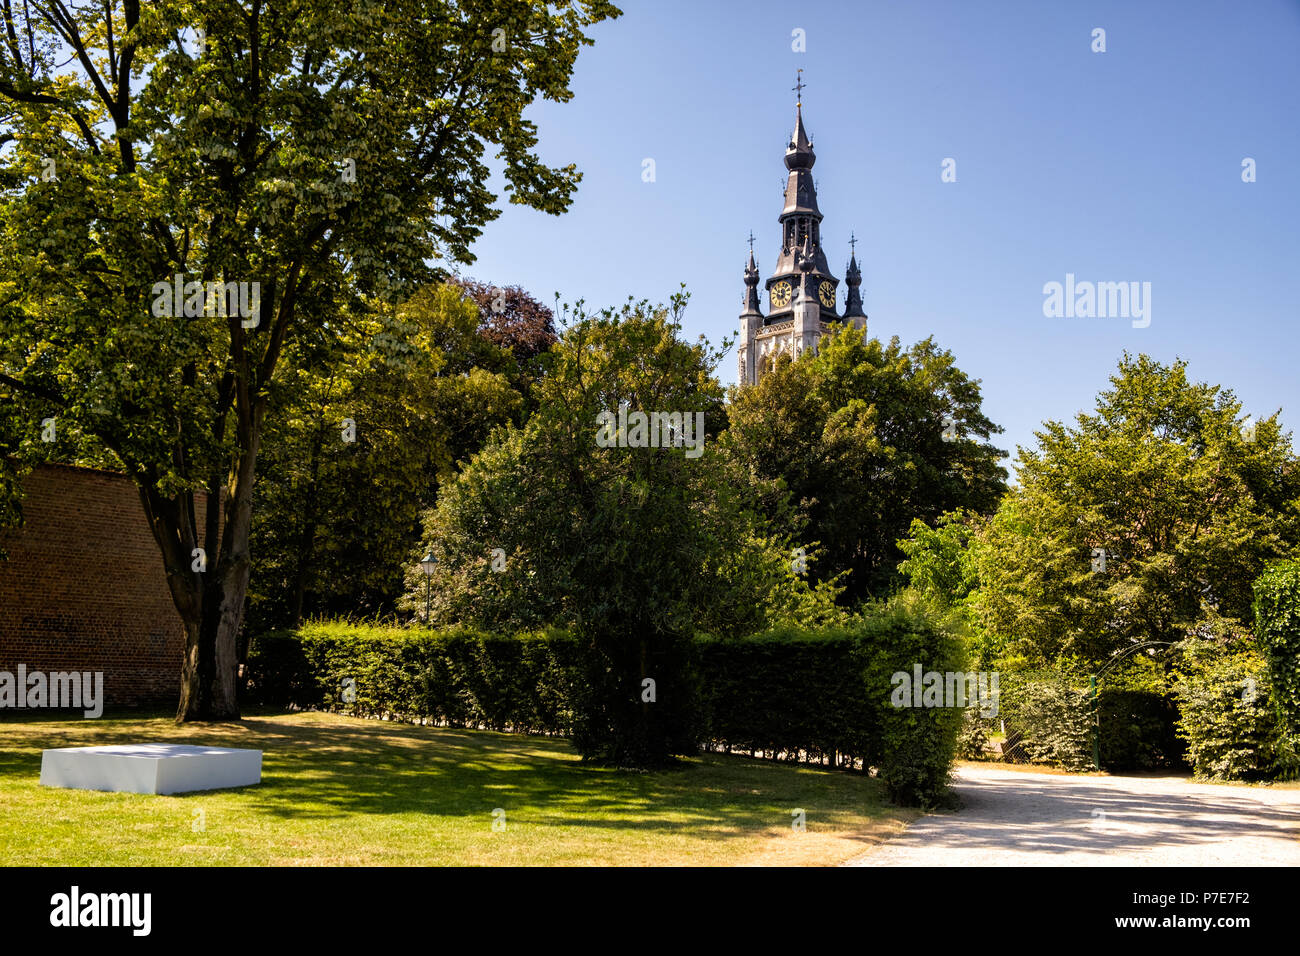 The Beguinage Park in Kortrijk the St. Martin's church in the background on a bright sunny day. Kortrijk, Flanders, Belgium Stock Photo